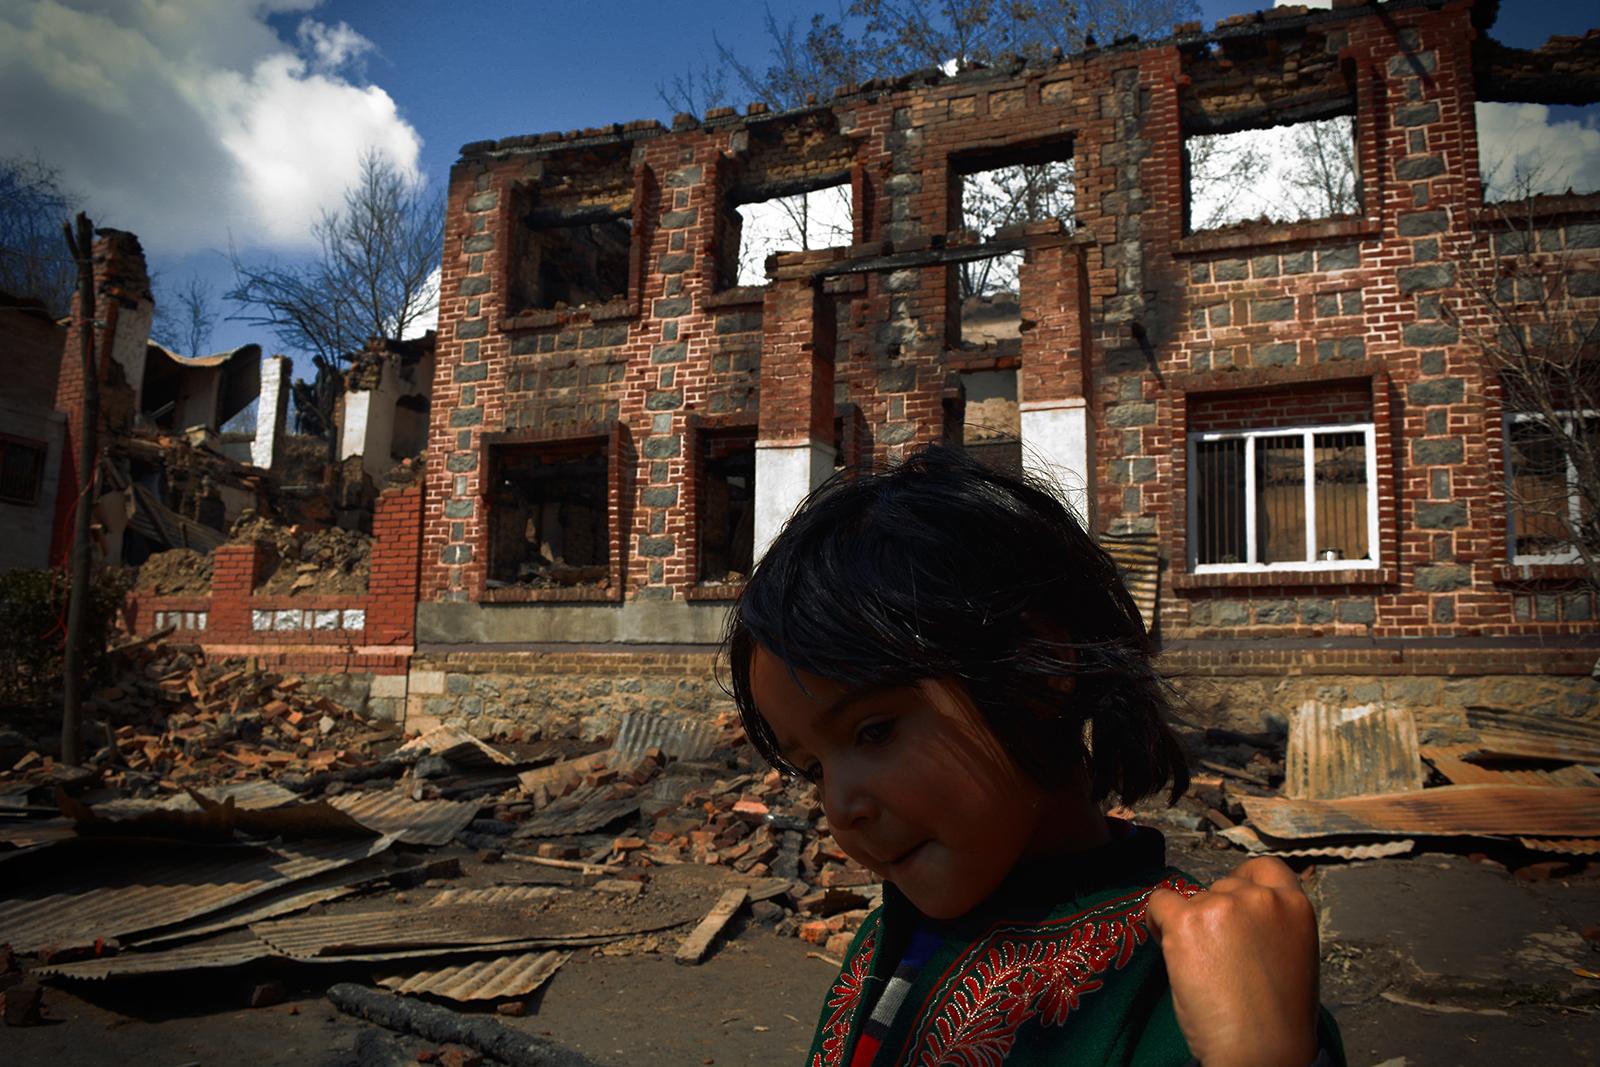 Kashmir-The Never Ending War - A girl walks past the ruins of a bombed house of a poet...